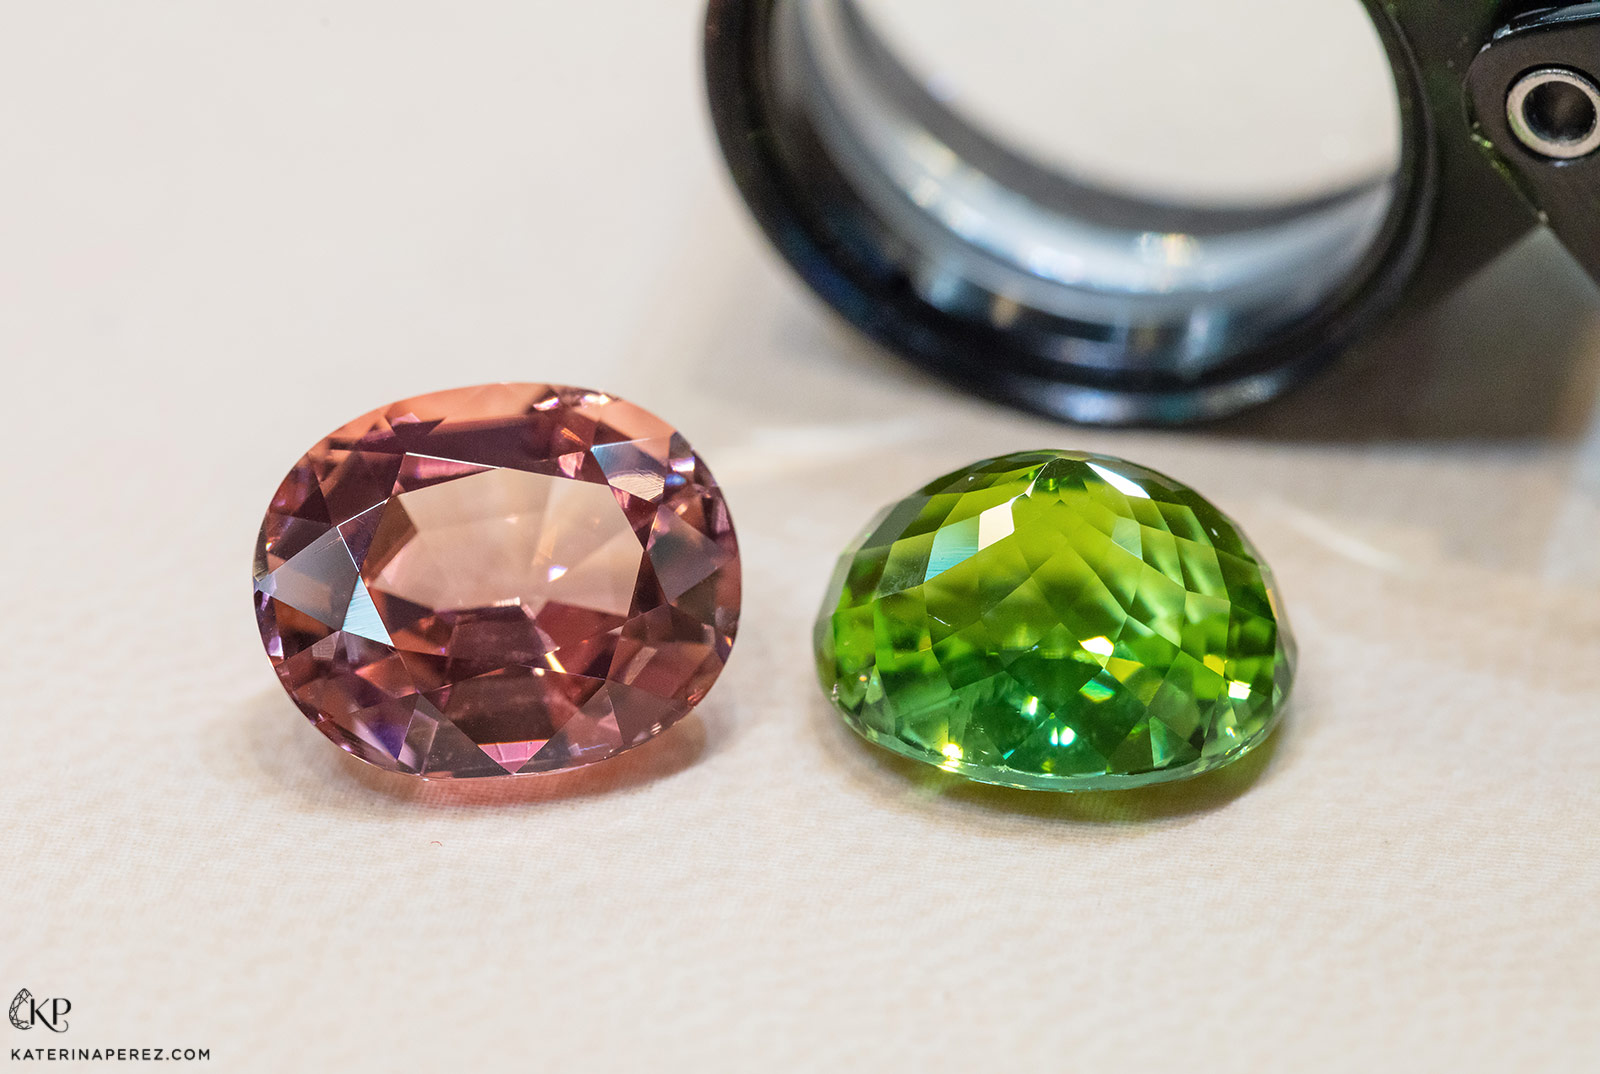 Nomad's Gems tourmalines acquired for re-cutting. Both of them illustrate imperfections of cuts as the facets are not perfectly symmetrical